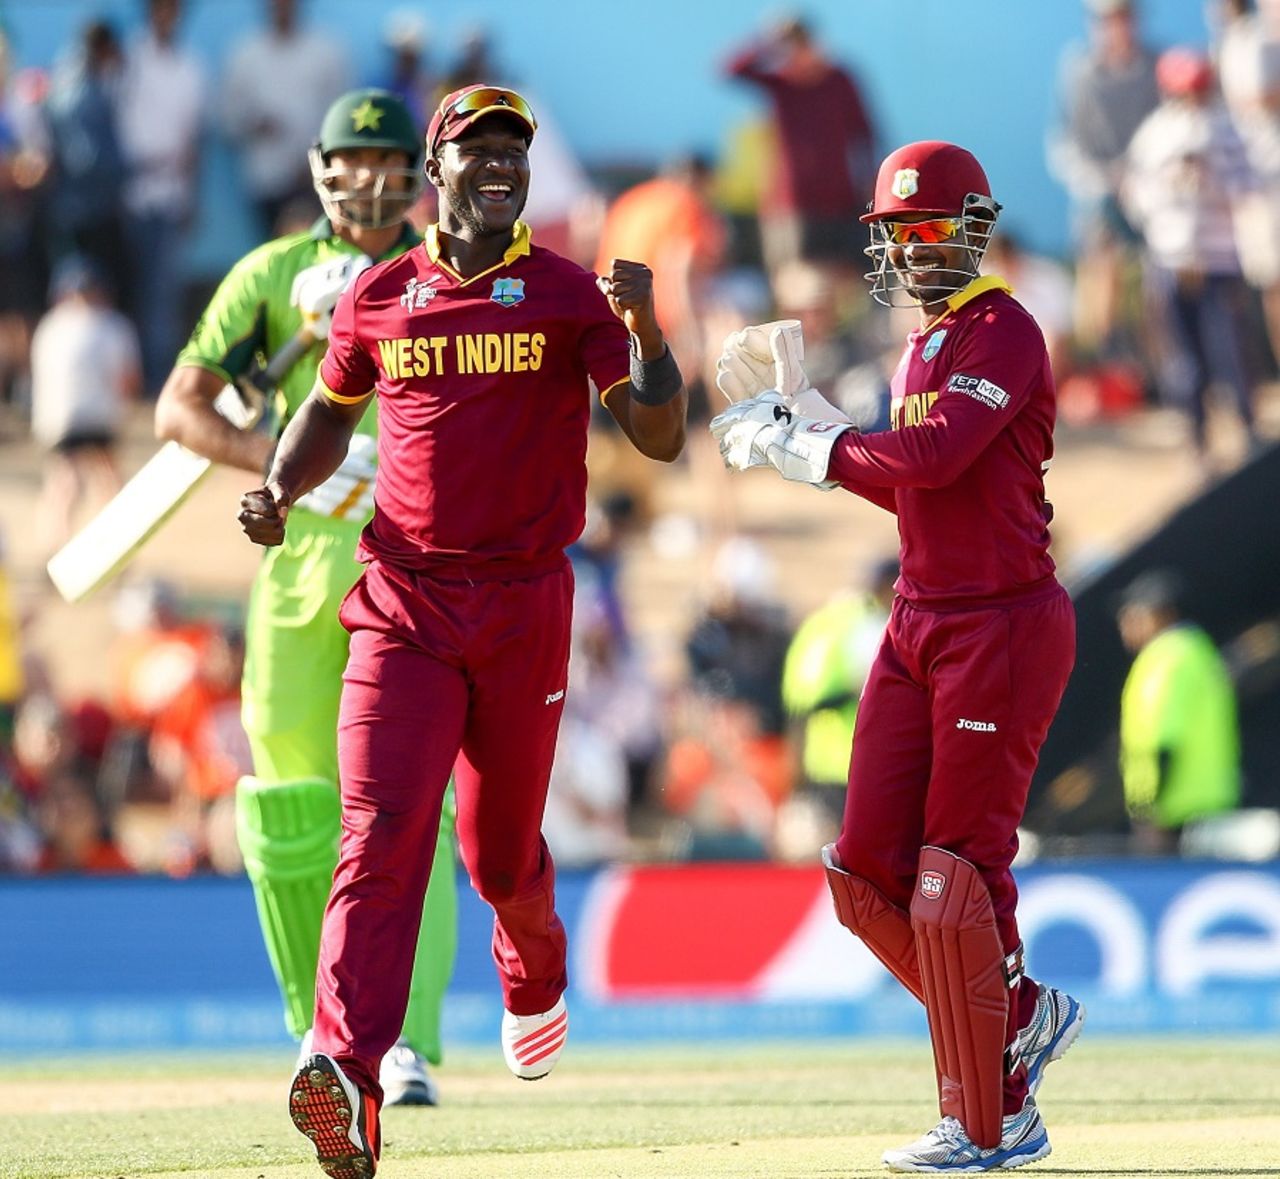 Darren Sammy and Denesh Ramdin are all smiles after West Indies wrapped up a 150-run win, Pakistan v West Indies, World Cup 2015, Group B, Christchurch, February 21, 2015